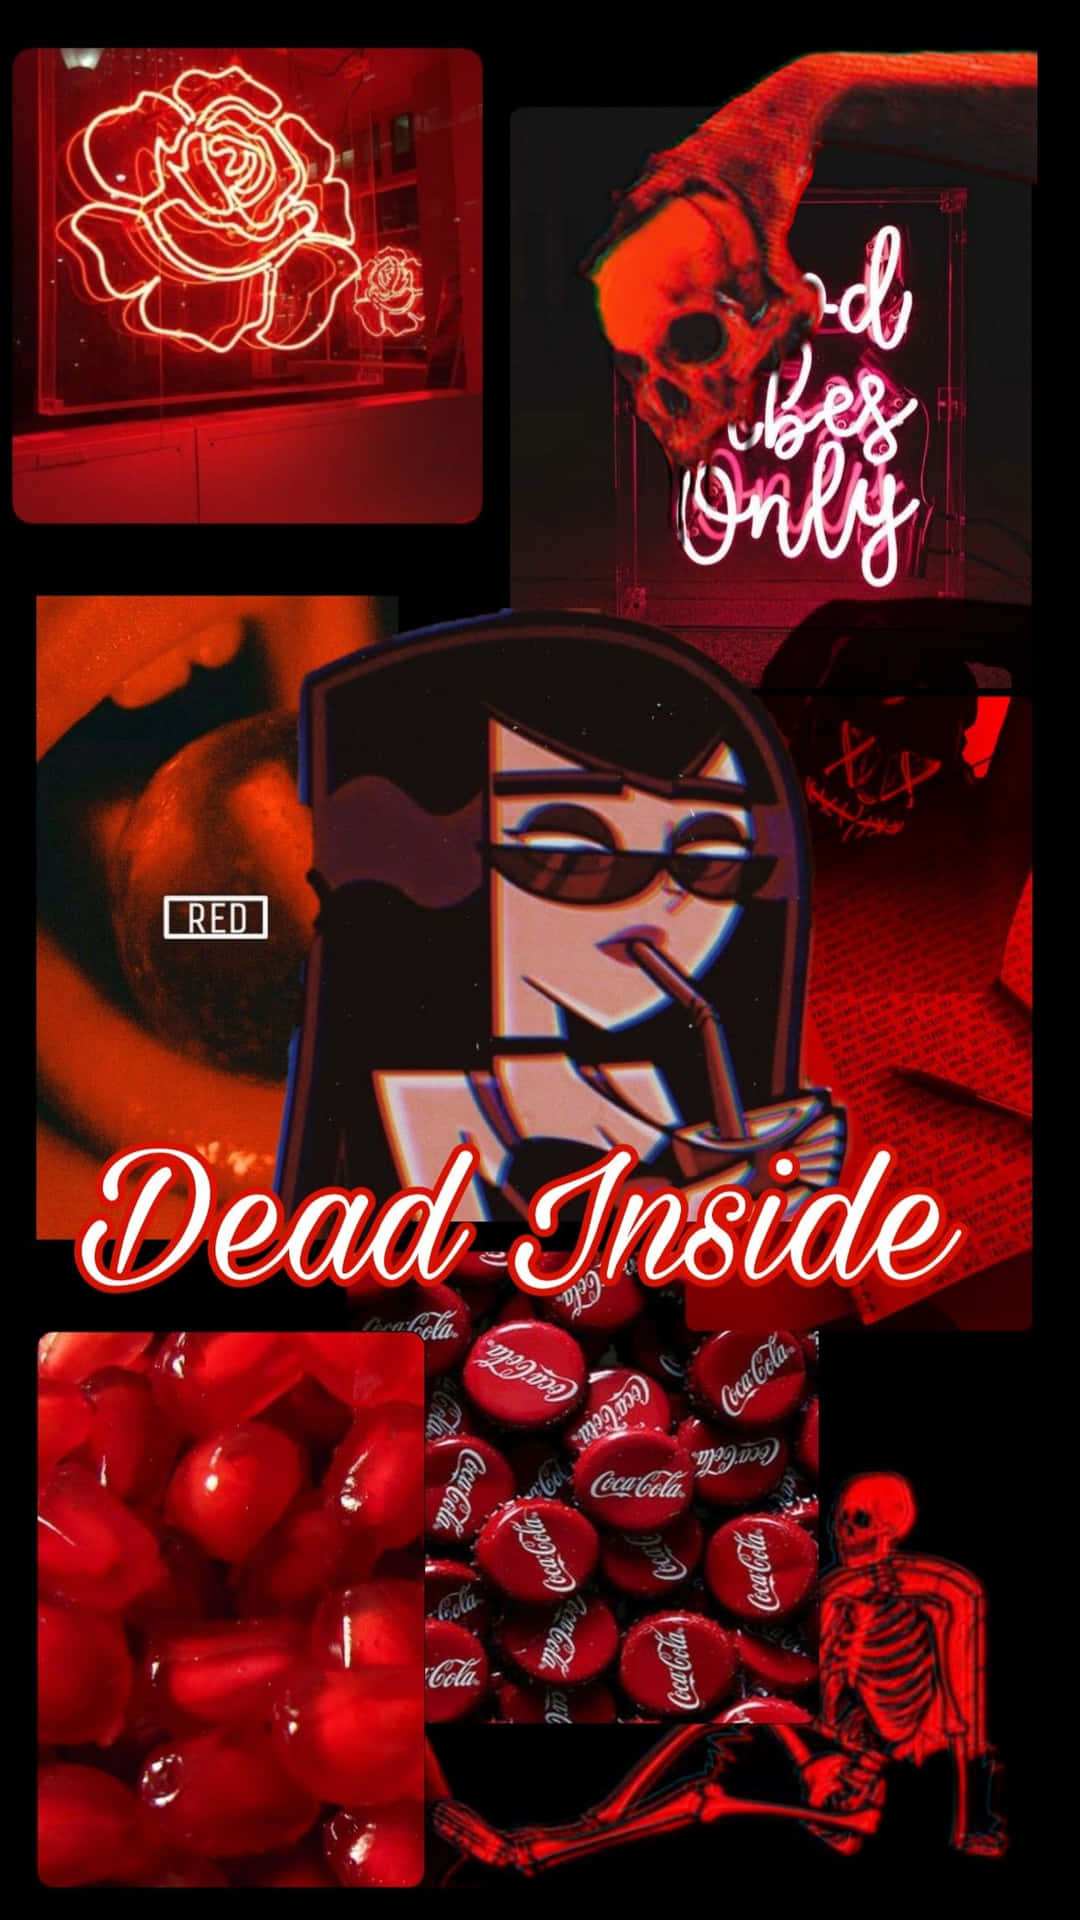 Dead Inside - A Collage Of Images With The Words Dead Inside Wallpaper